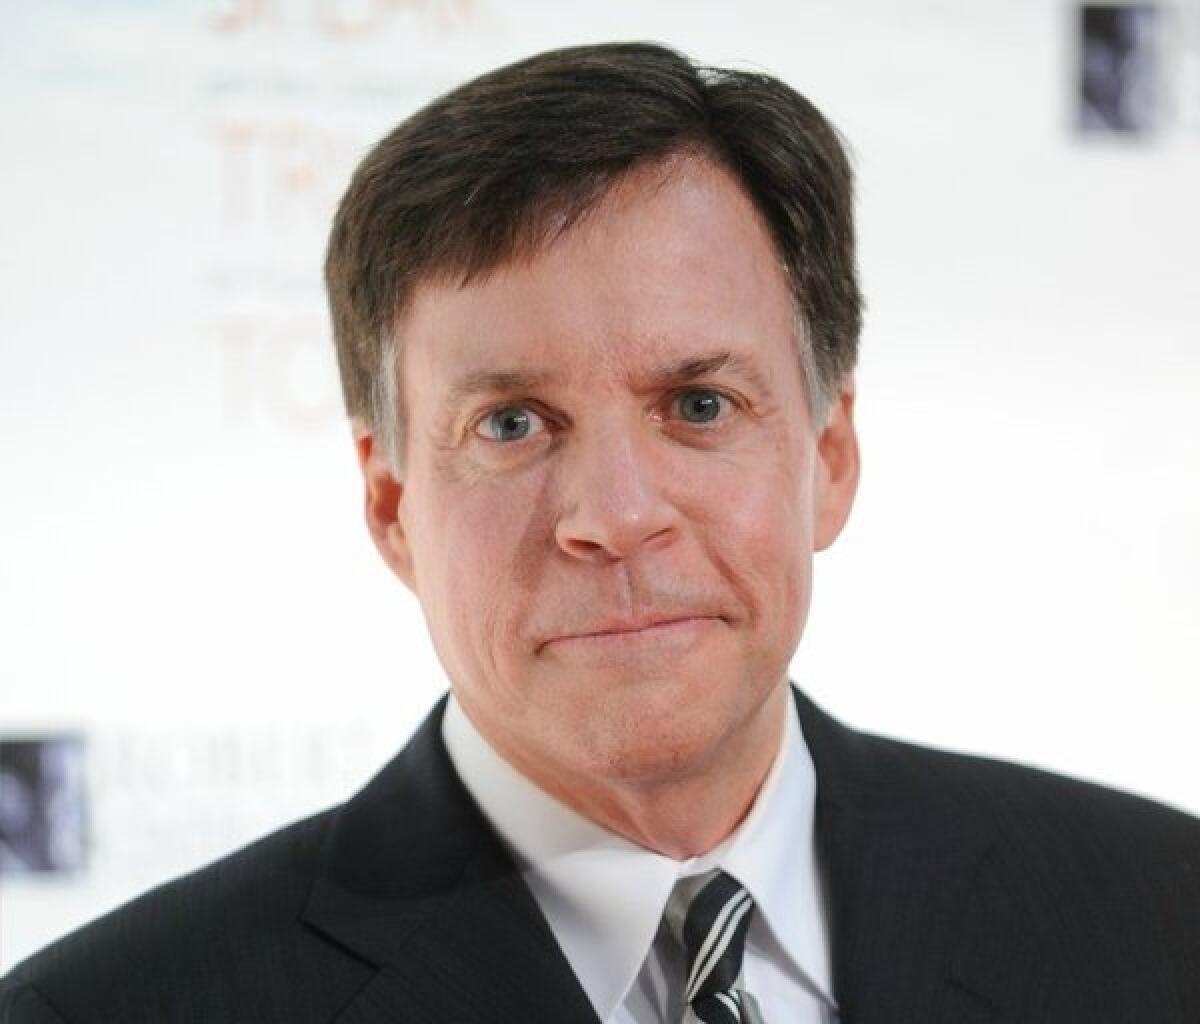 Bob Costas recently spoke out about guns during a "Sunday Night Football" broadcast.